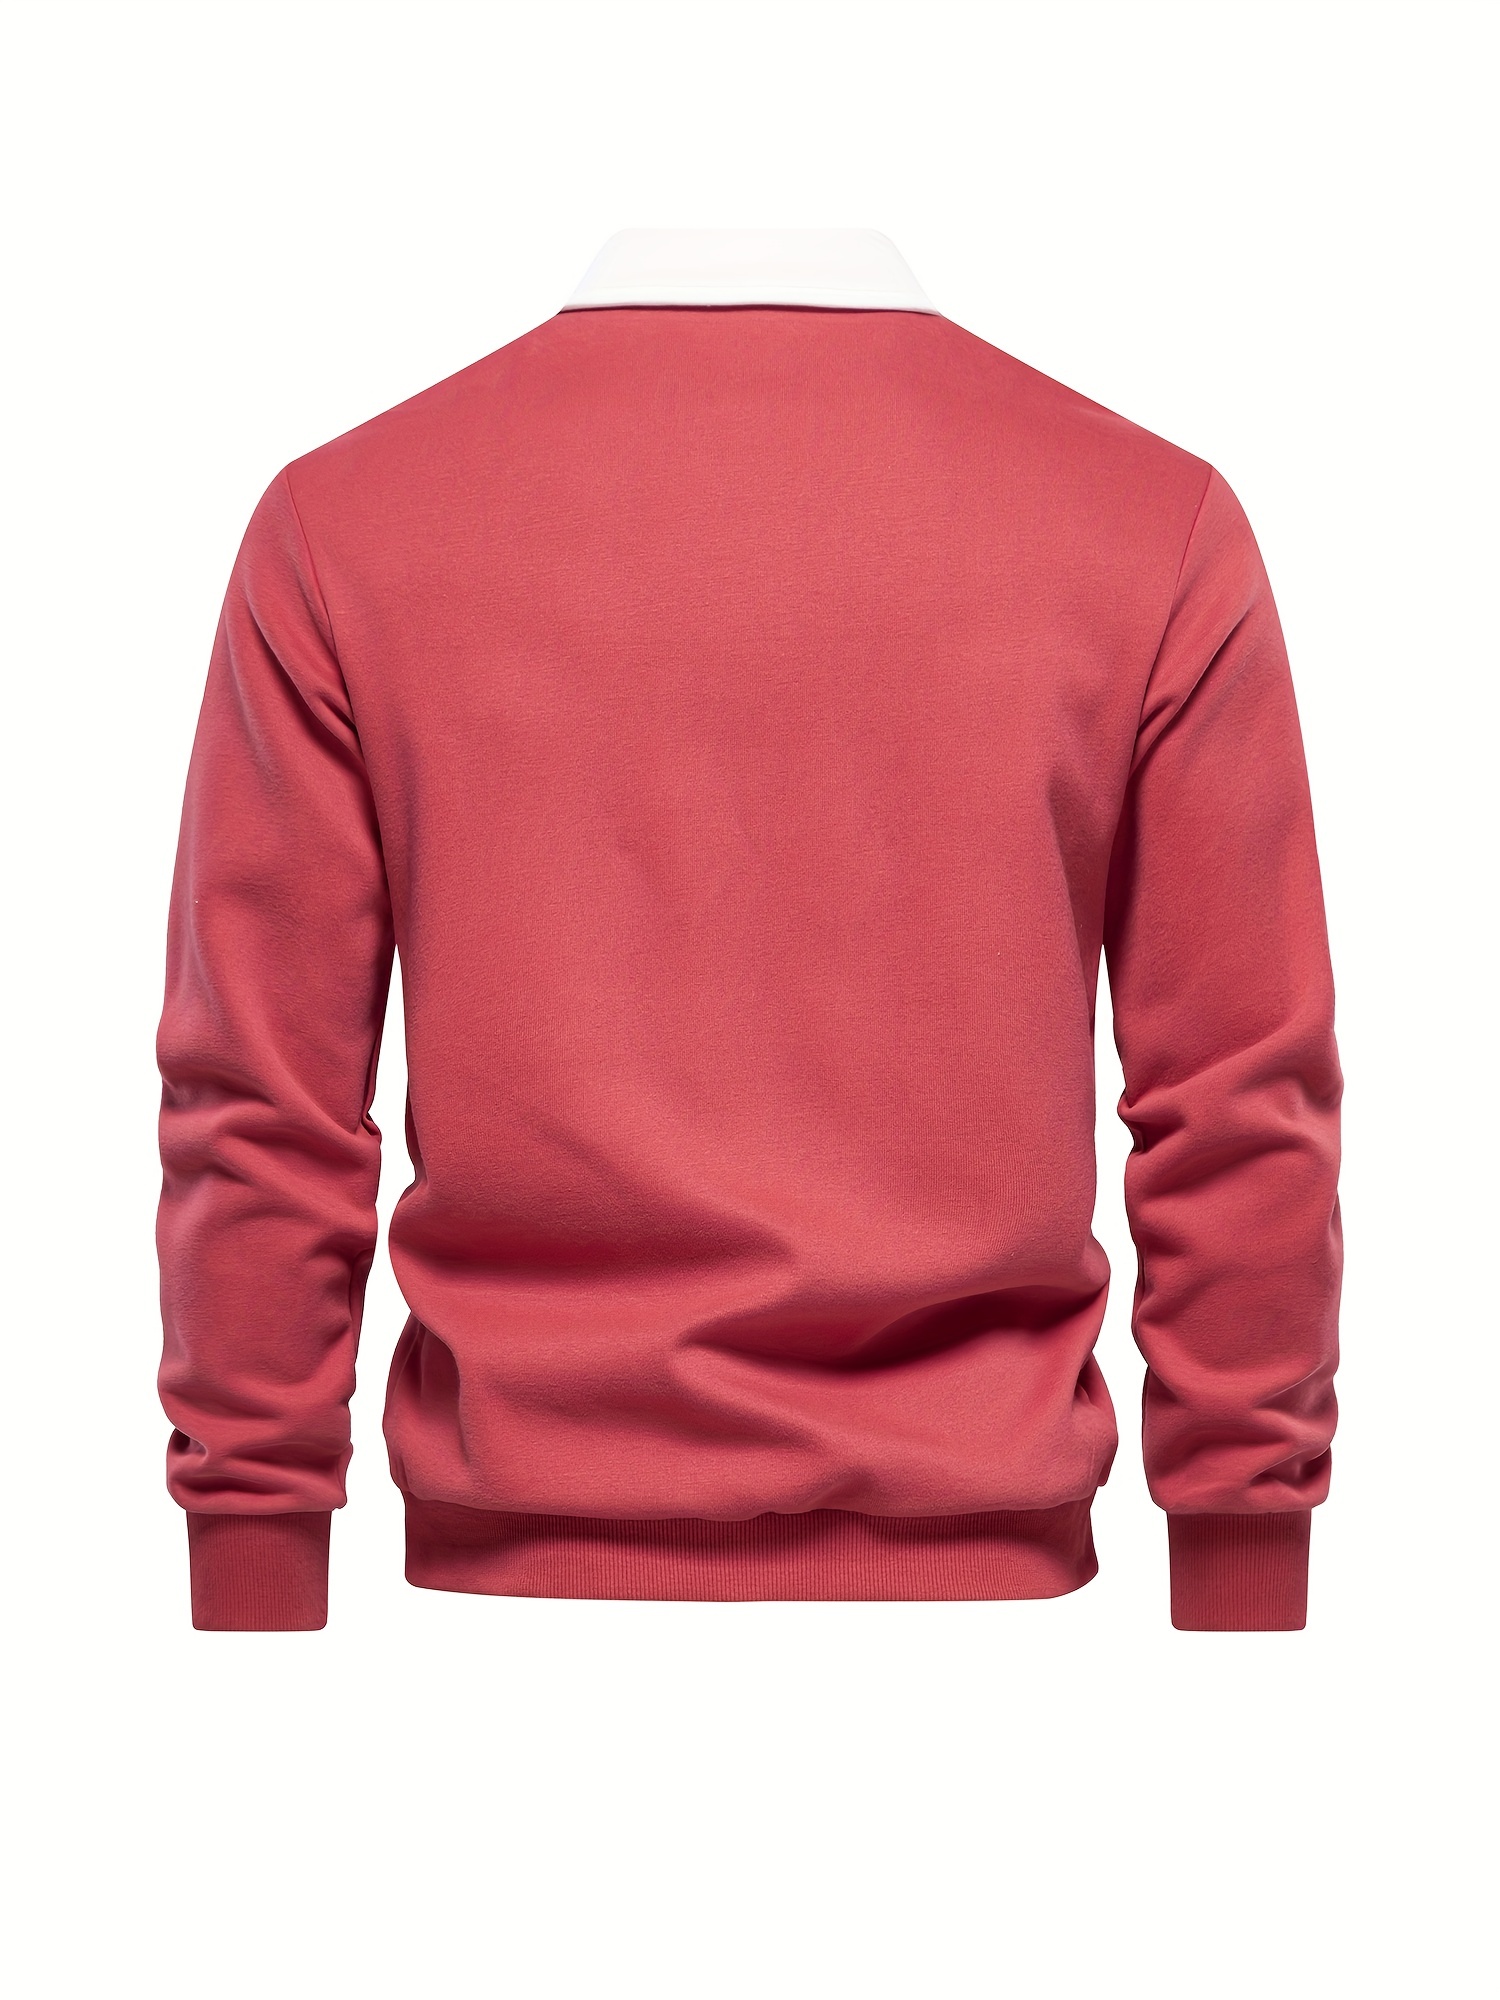 cotton blend retro lapel shirt mens casual v neck pullover long sleeve rugby shirt for spring fall mens clothing details 25